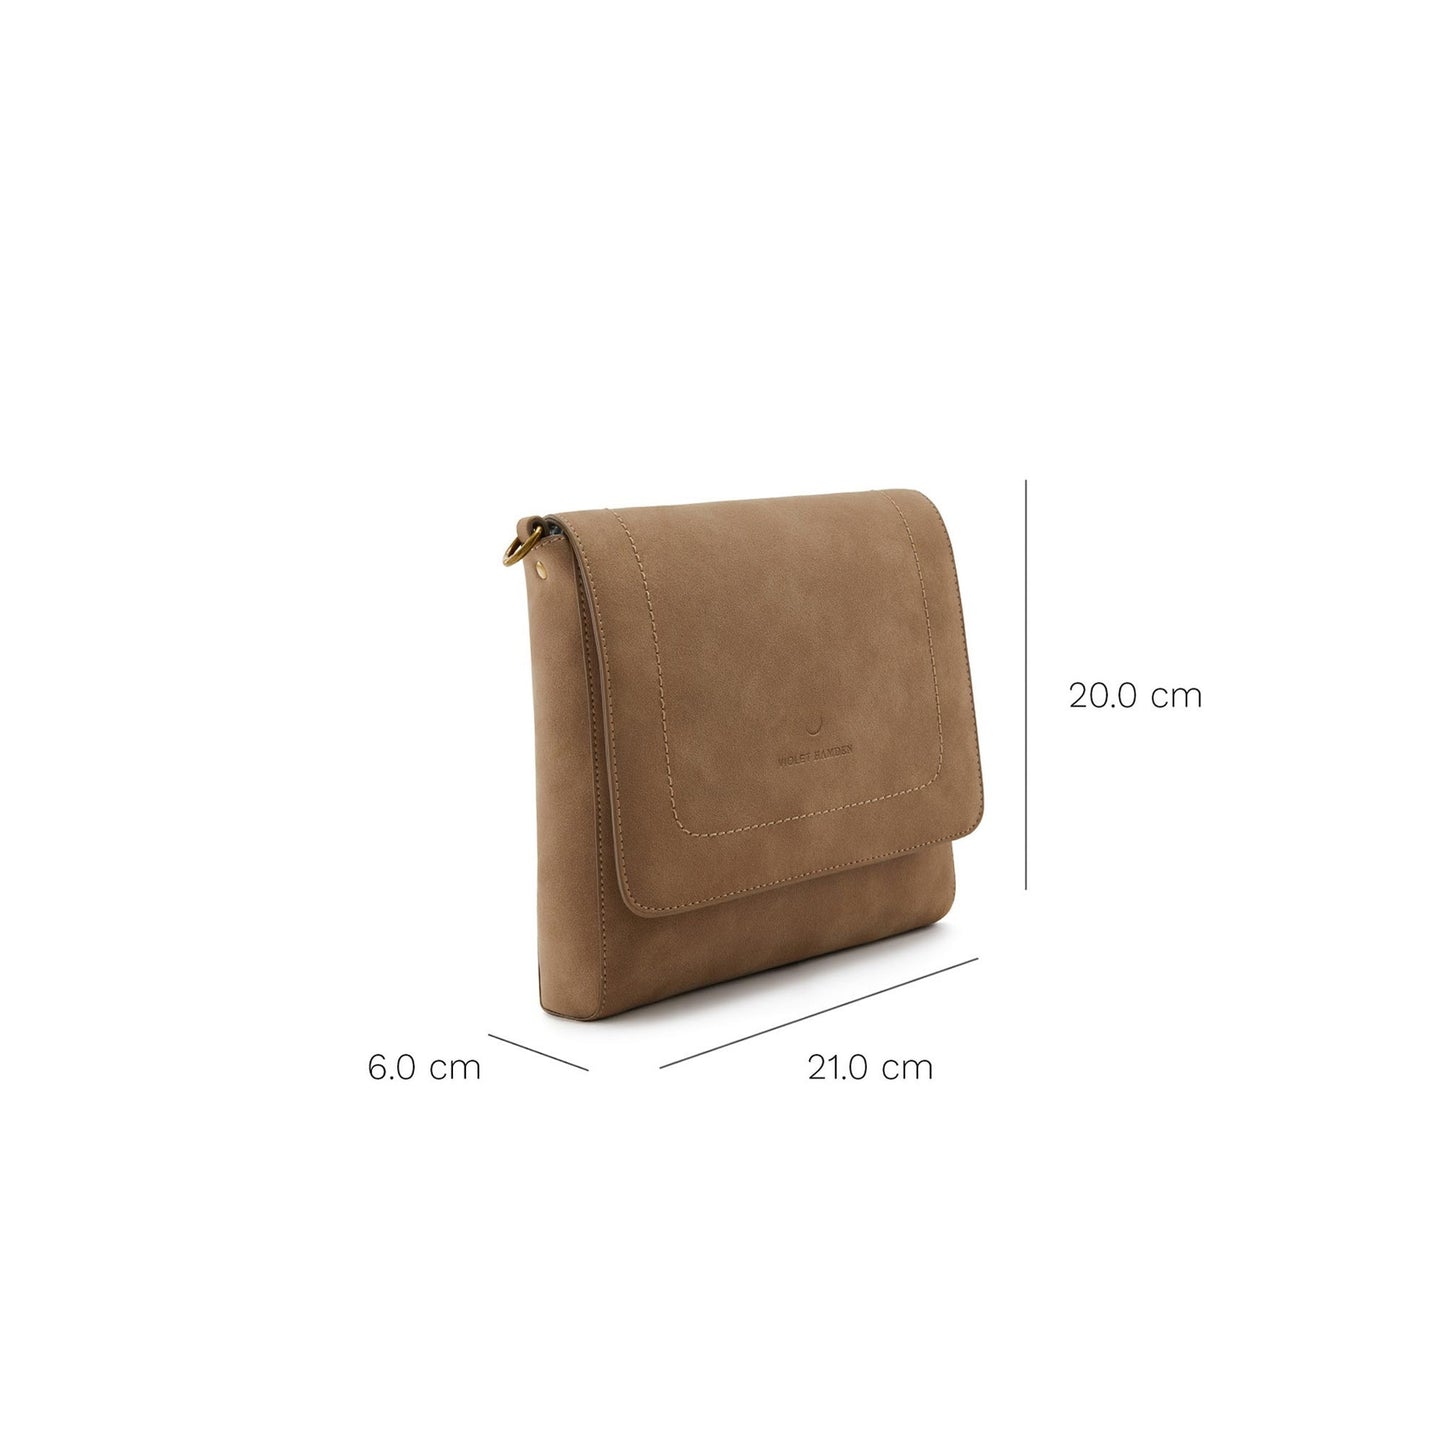 My Daily taupe crossbody bag